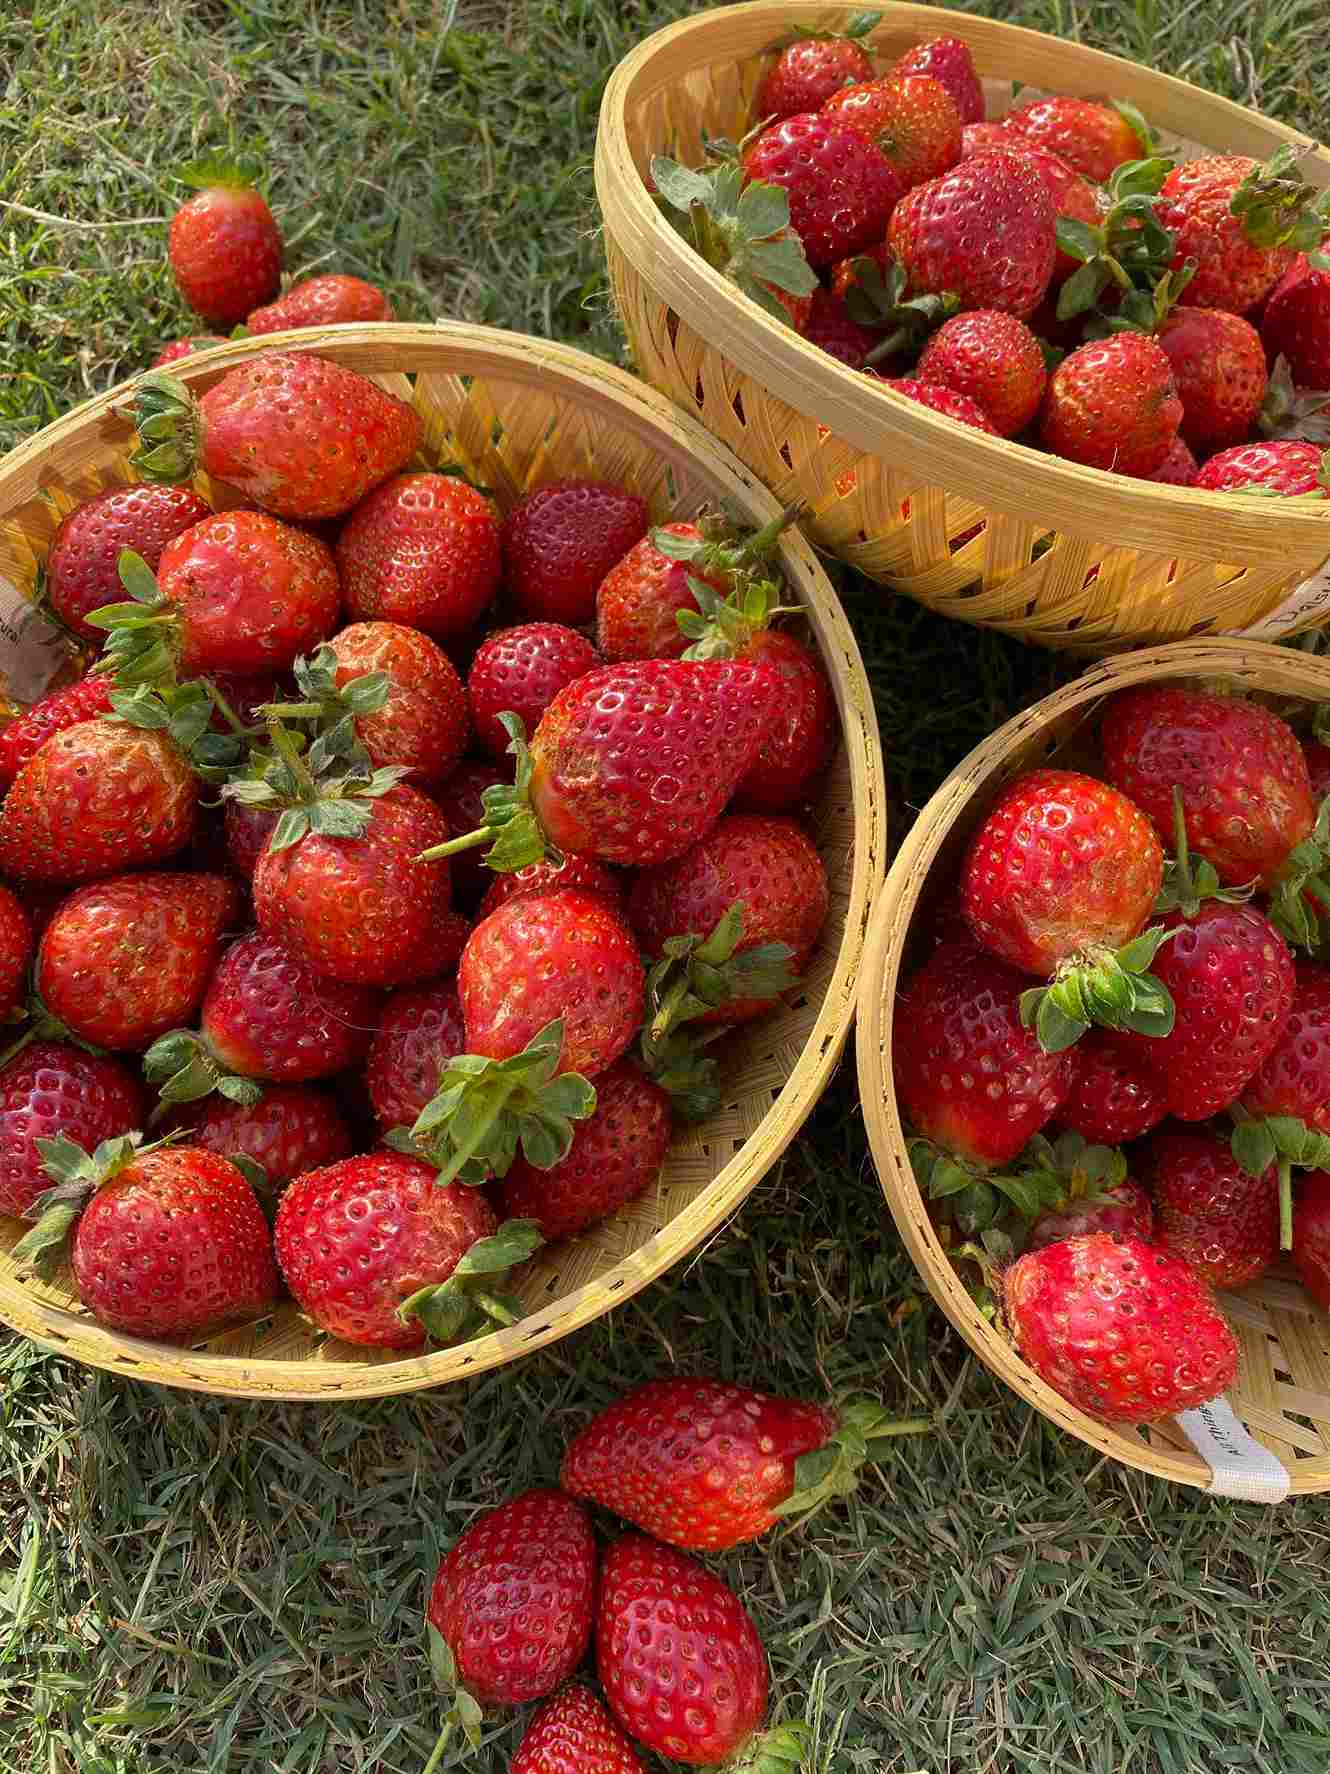 Strawberries are one of the hit favourites at MharoKhet